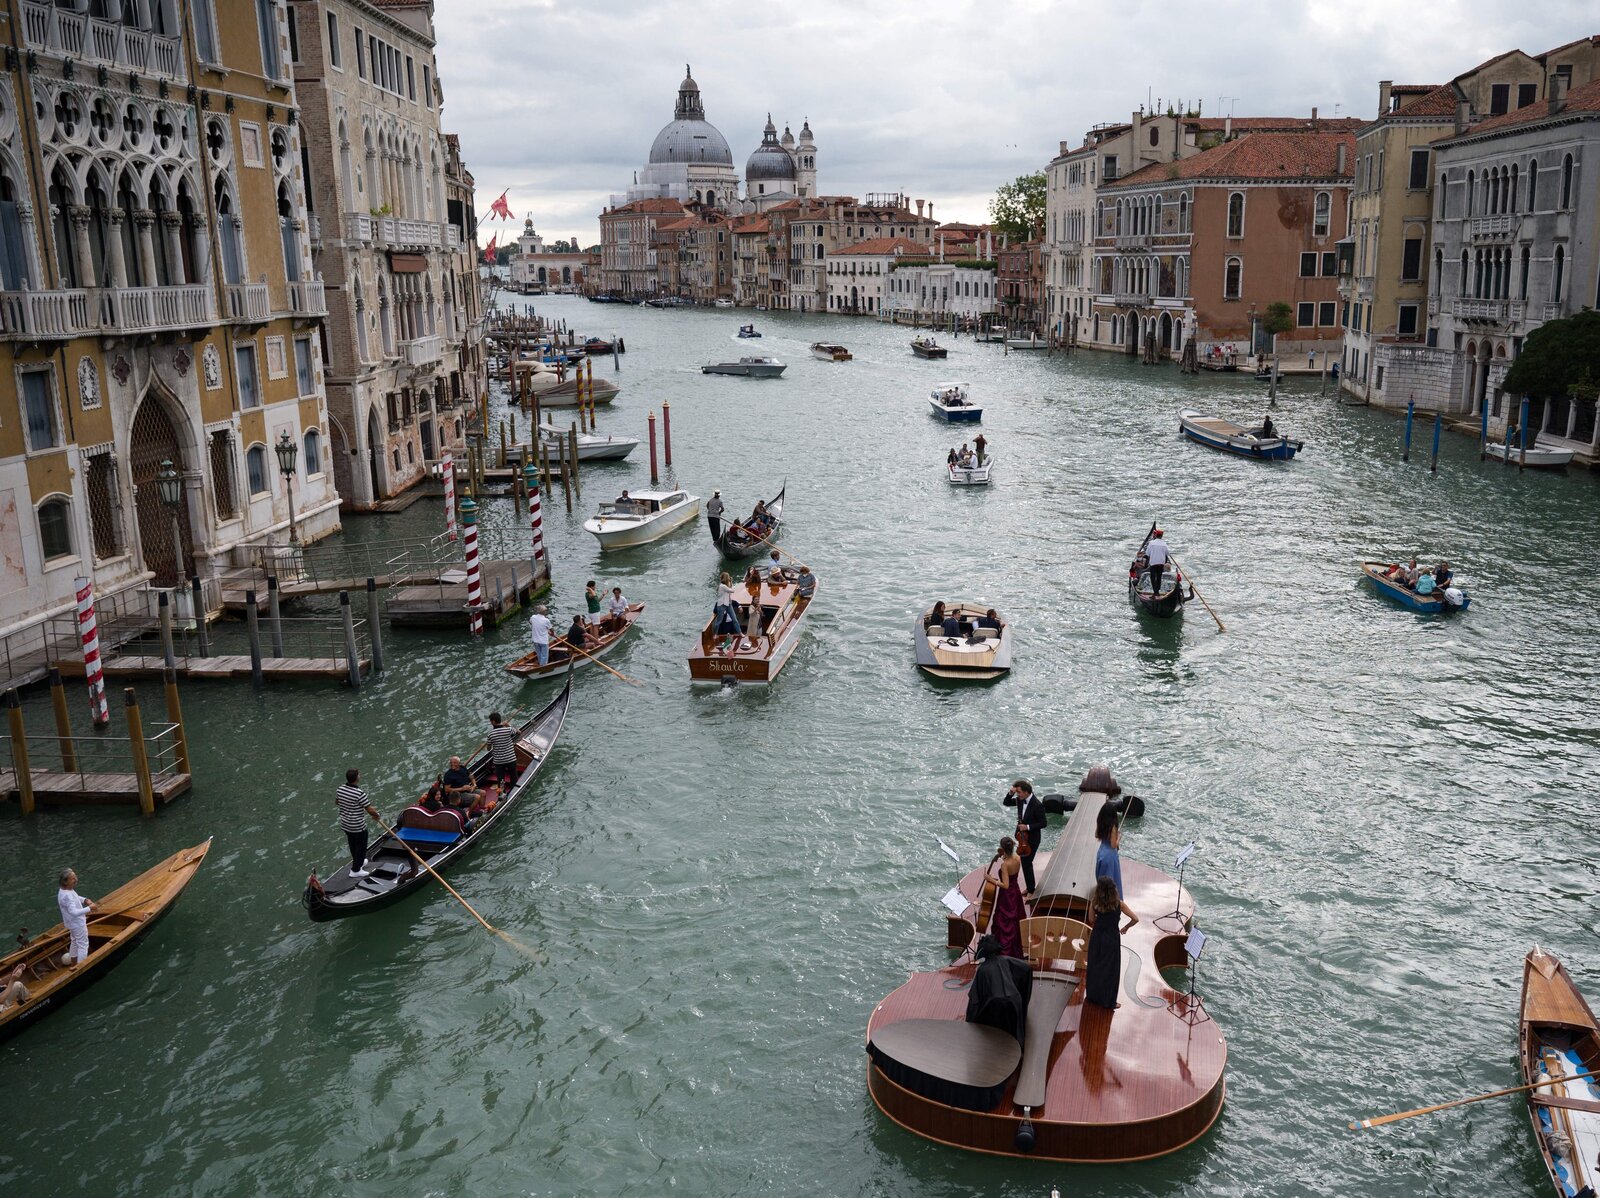 "Noah's Violin", a giant floating violin by Venetian sculptor Livio De Marchi, makes its maiden voyage for a concert on the Grand Canal in Venice on September 18, 2021. - Twelve and a half metres of wood, some of it hand-crafted, symbolizing the rebirth of Venice through art, culture and music, said the authors. The floating violin is hosting musicians from the Benedetto Marcello Conservatory playing Vivaldi. (Photo by Marco BERTORELLO / AFP) (Photo by MARCO BERTORELLO/AFP via Getty Images)